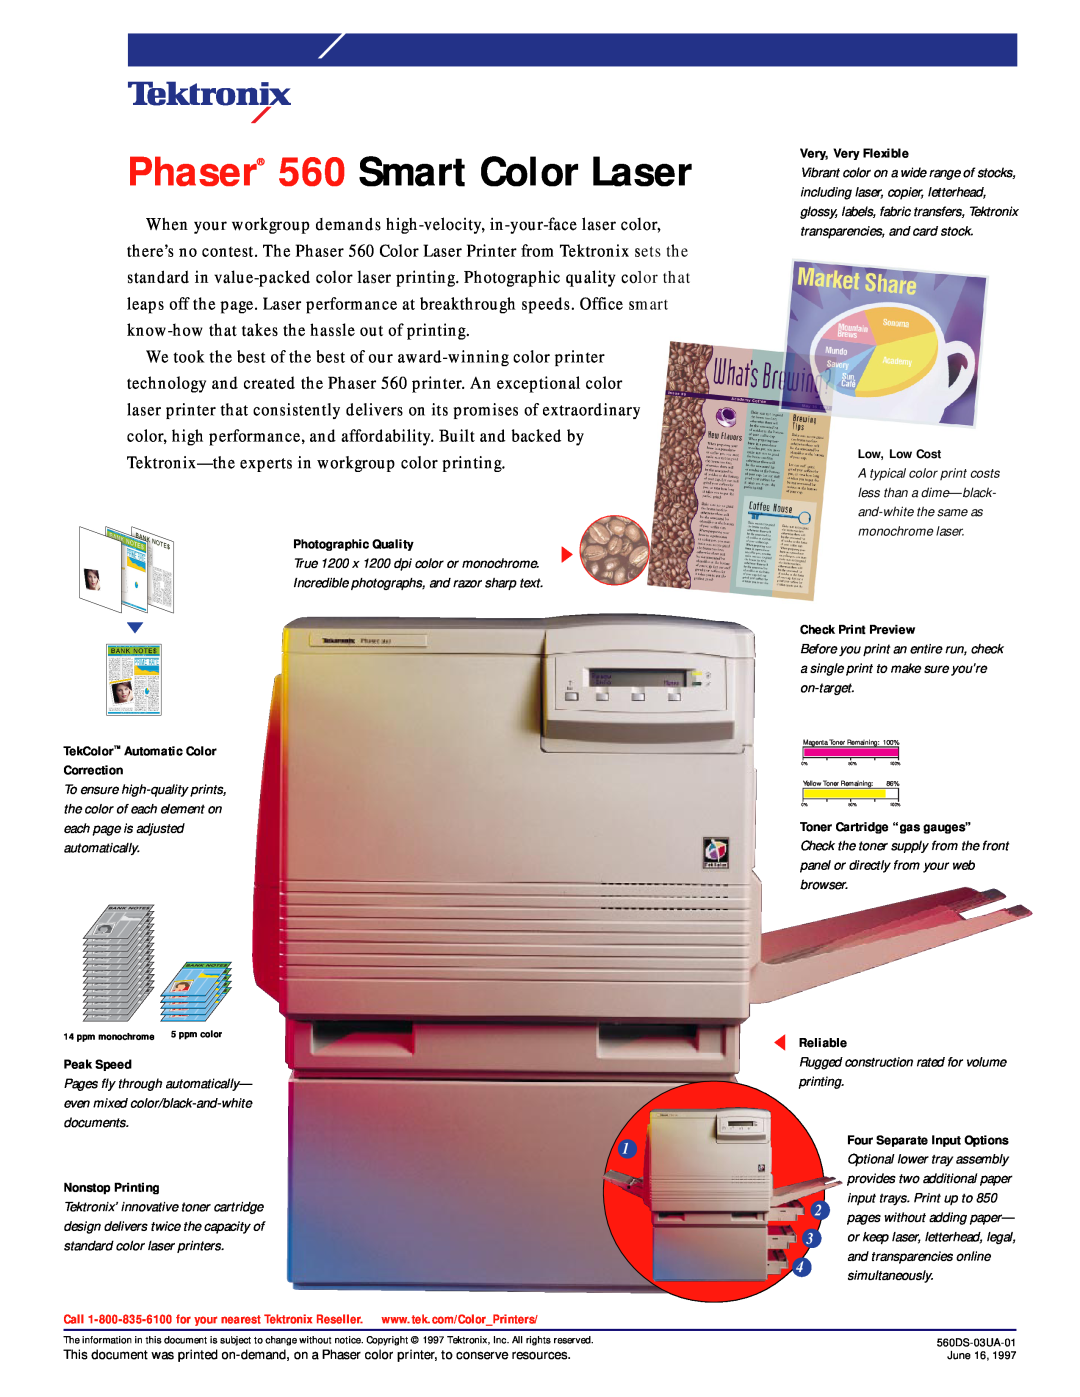 Xerox manual Phaser 560 Smart Color Laser 